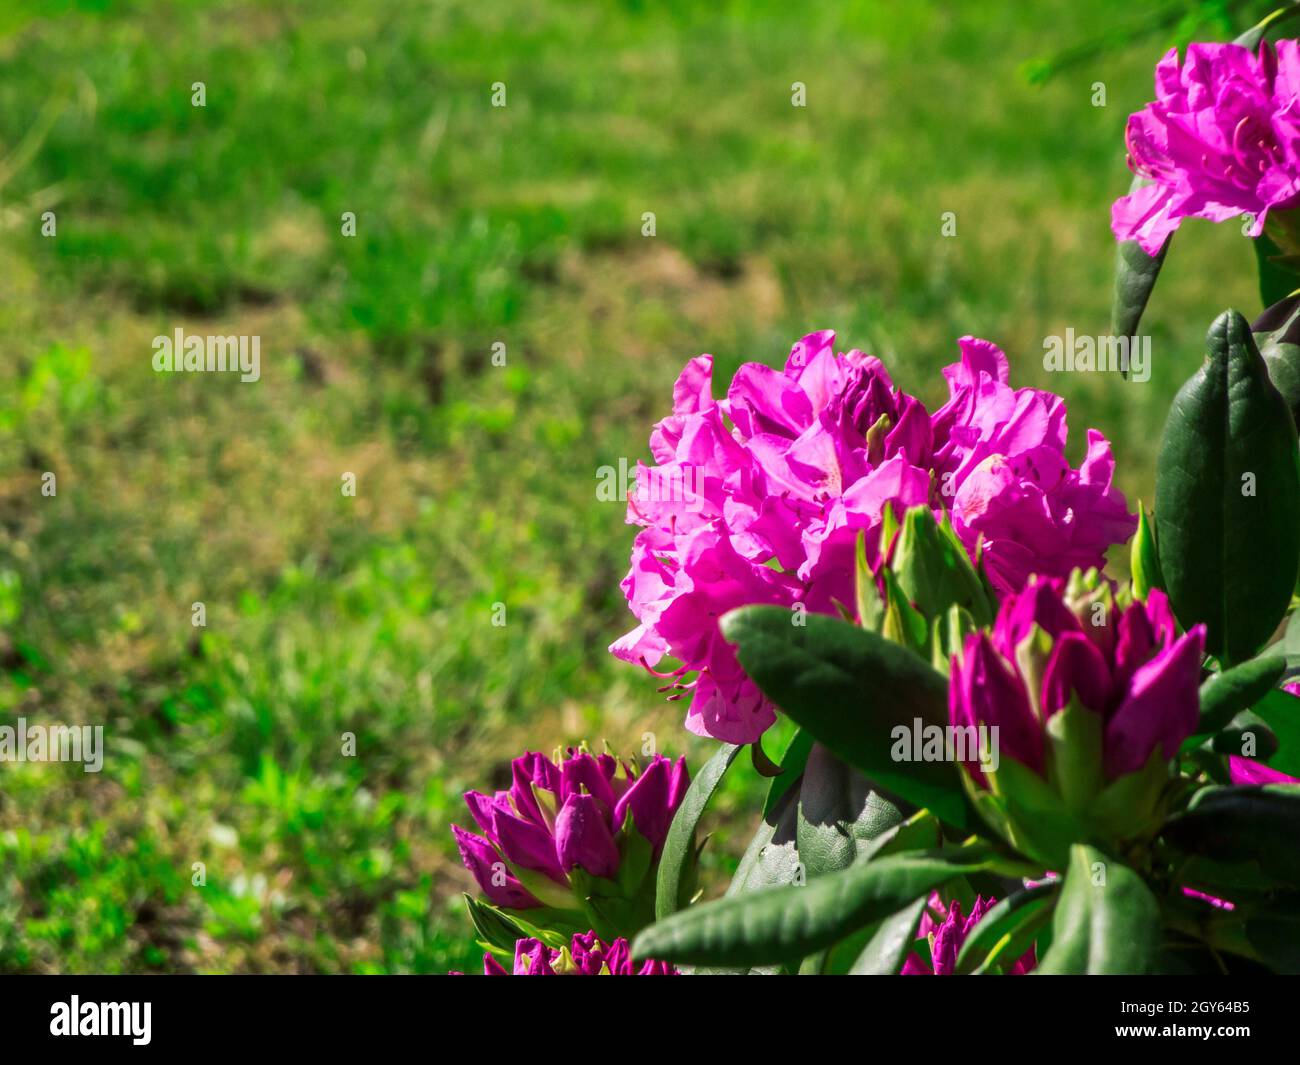 Close up of purple rhododendron flowers in front of a green lawn. Stock Photo